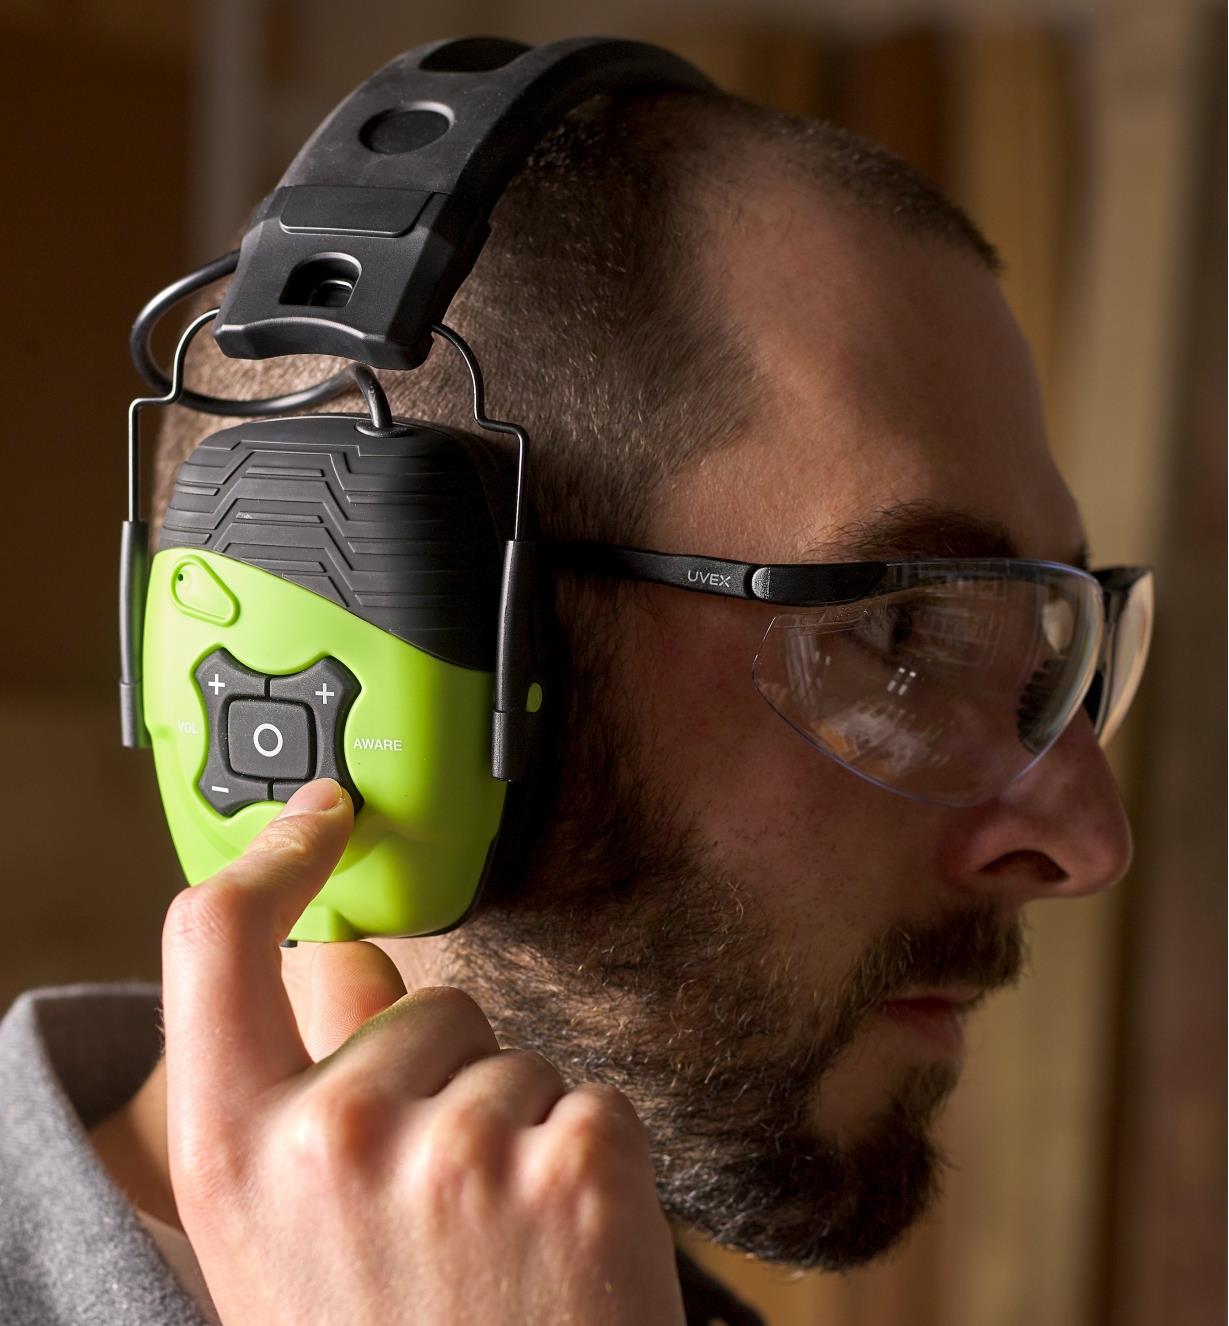 Operating the volume control buttons on the ISOTunes LINK Aware earmuff hearing protectors